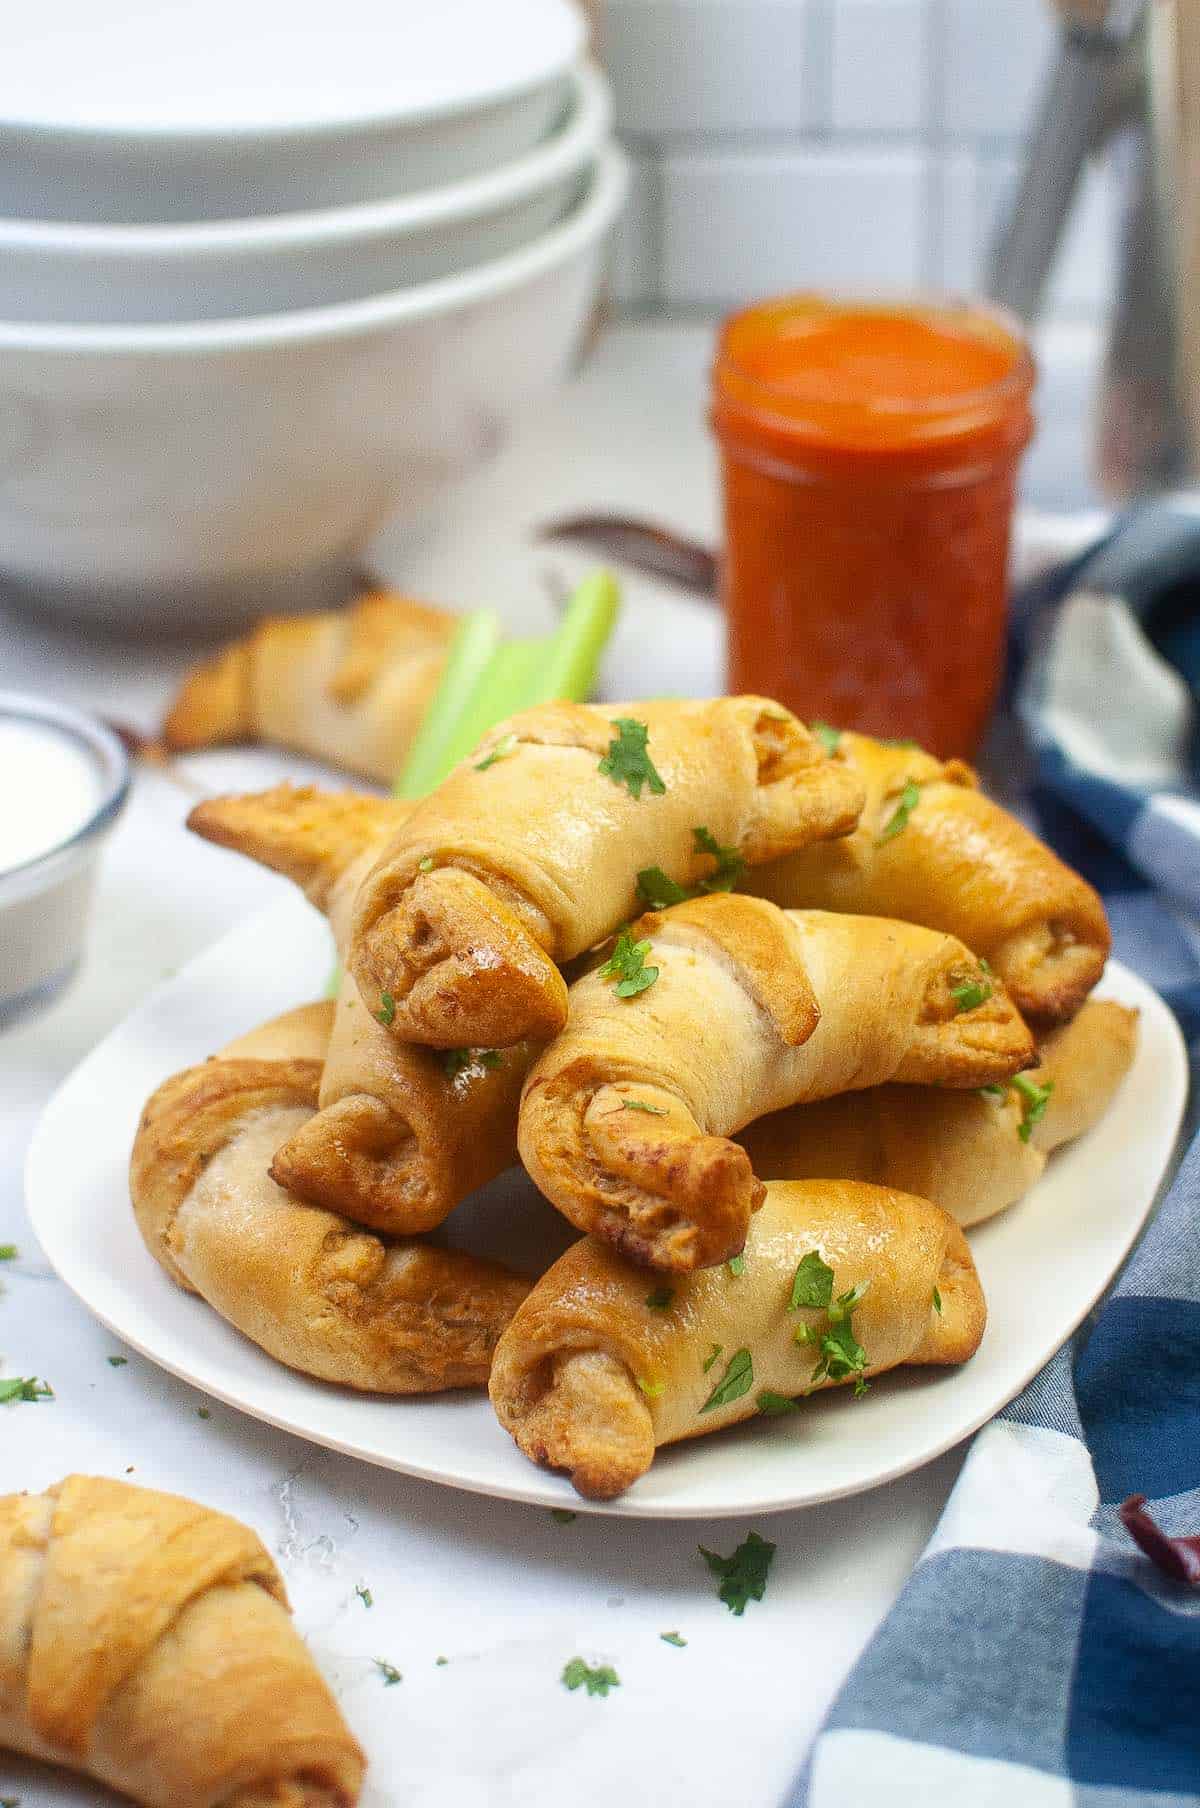 Buffalo sauce on the side of rolled up crescent rolls stuffed with chicken.